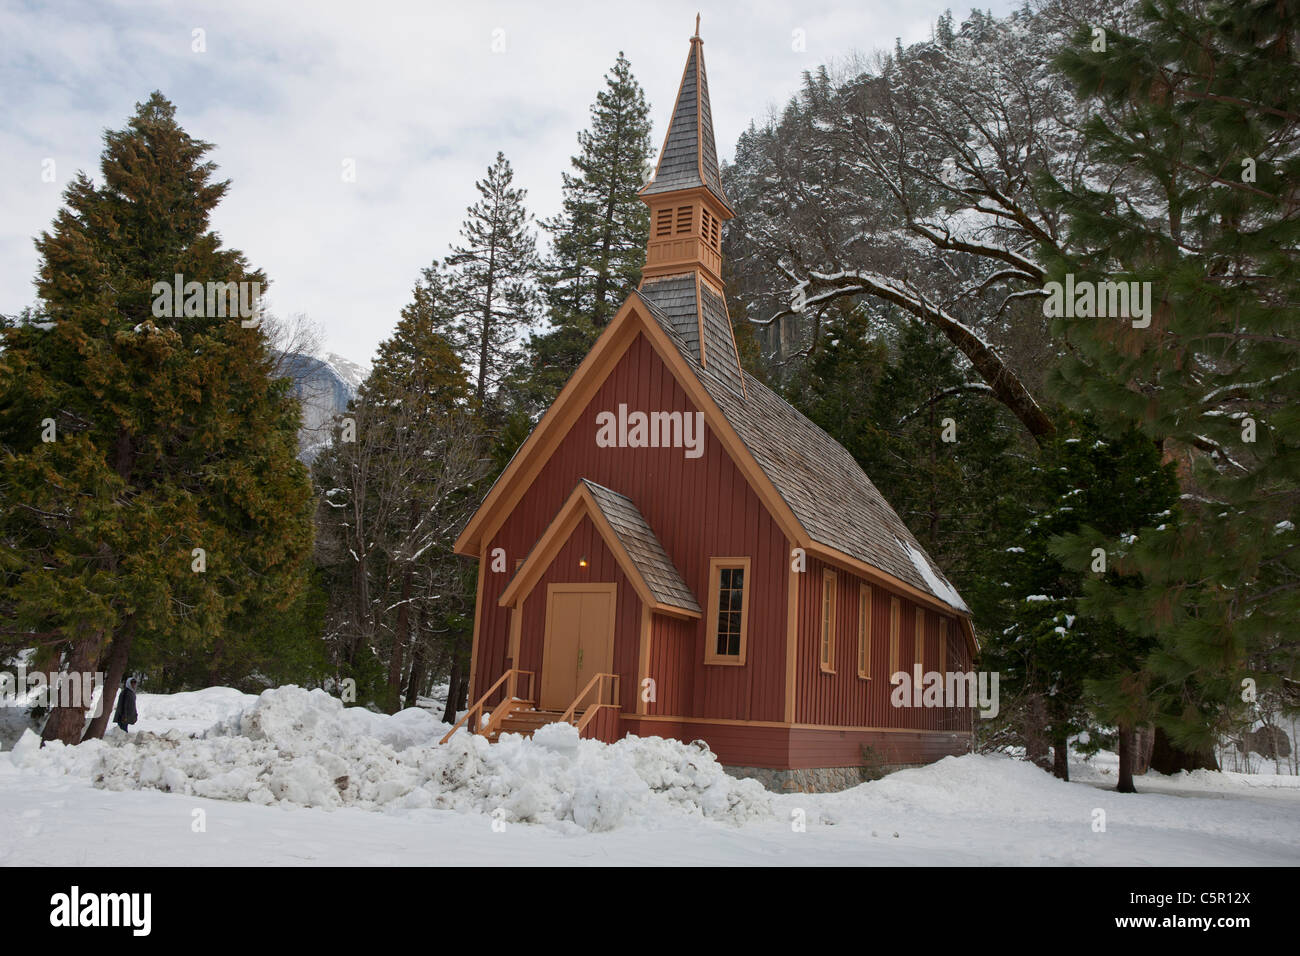 Yosemite Chapel with snow on the ground during winter, Yosemite National Park, California, United States of America Stock Photo